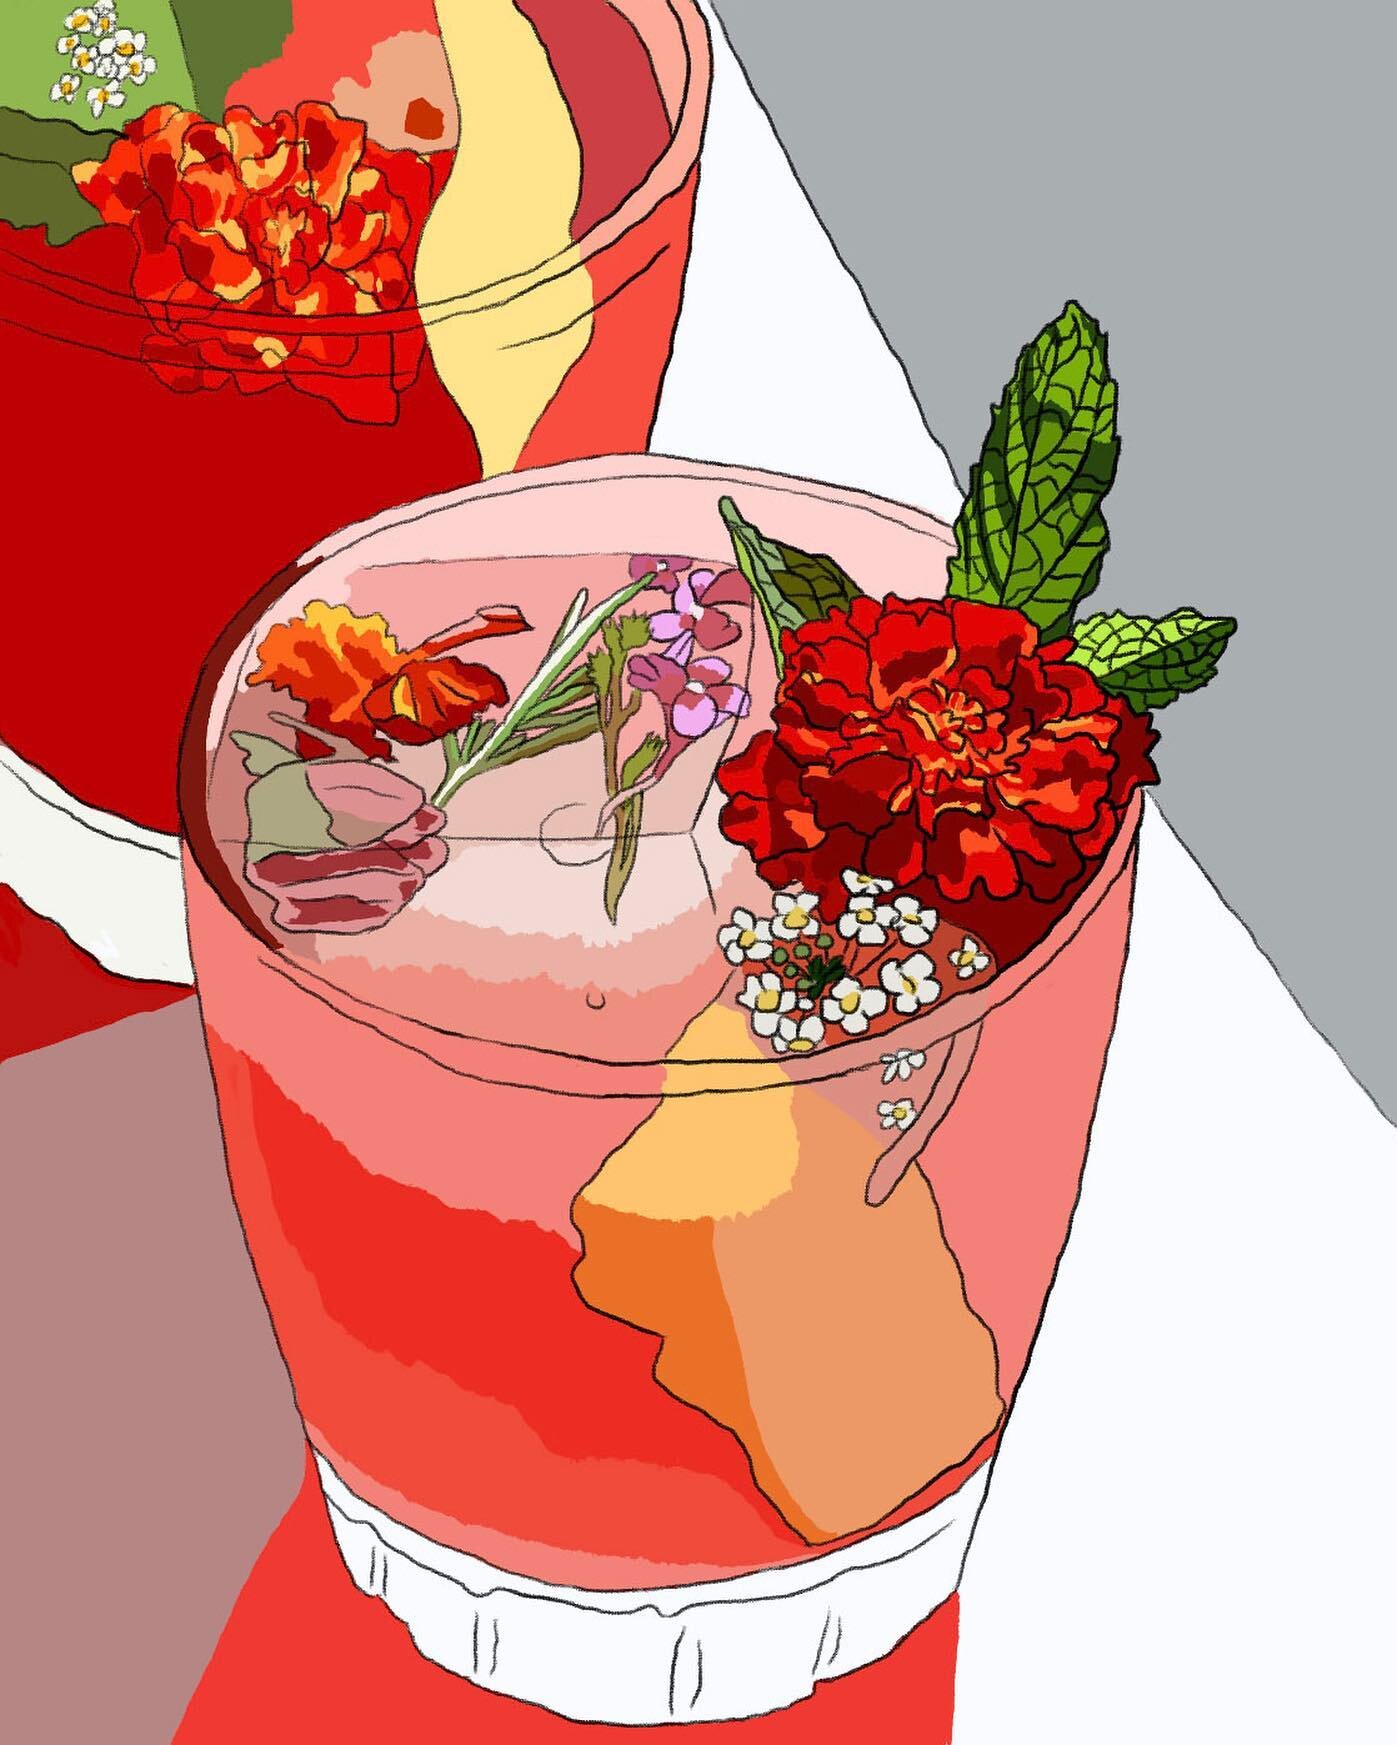 Was feeling so inspired by @milkandcardamom beautiful citrus and hibiscus cocktail with edible flower ice cubes that I needed to draw it! Go check out her recipes if you want to make one this weekend 🍹🌺🌸🌼🍹

#snpmag #cocktailtime #happyhour #chee